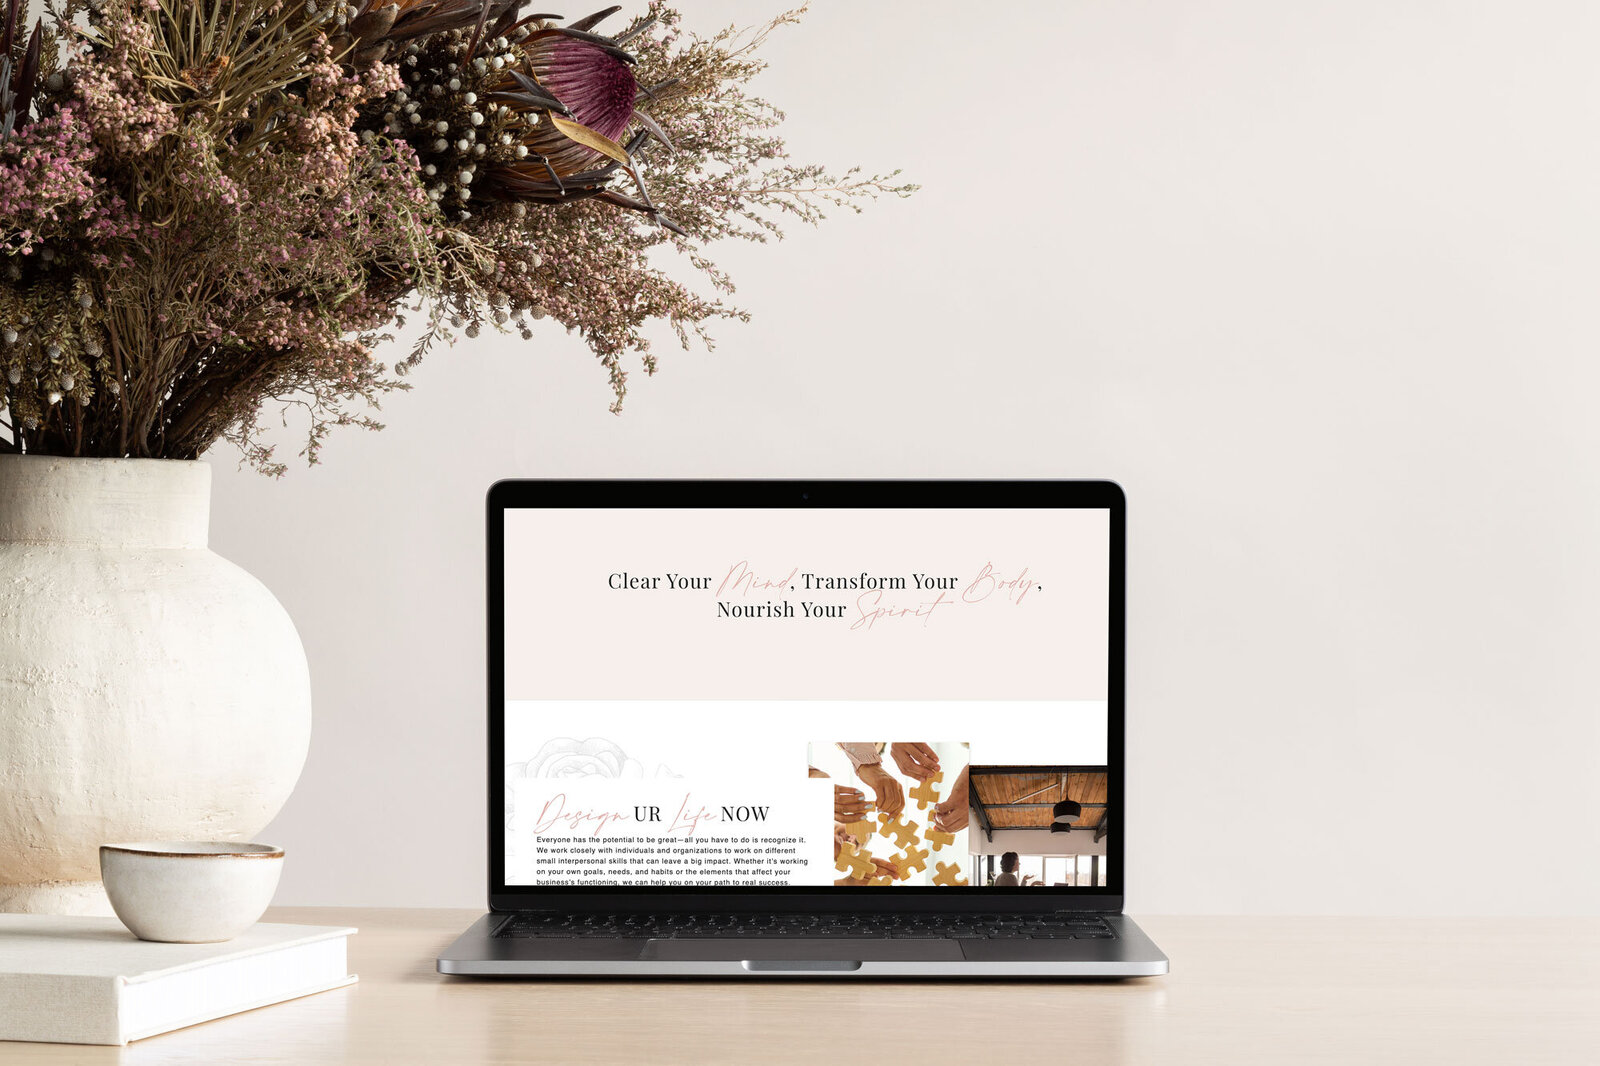 Featuring a sophisticated web design by The Agency, this laptop screen showcases the transformational journey offered by wellness experts in a clean, user-friendly interface.